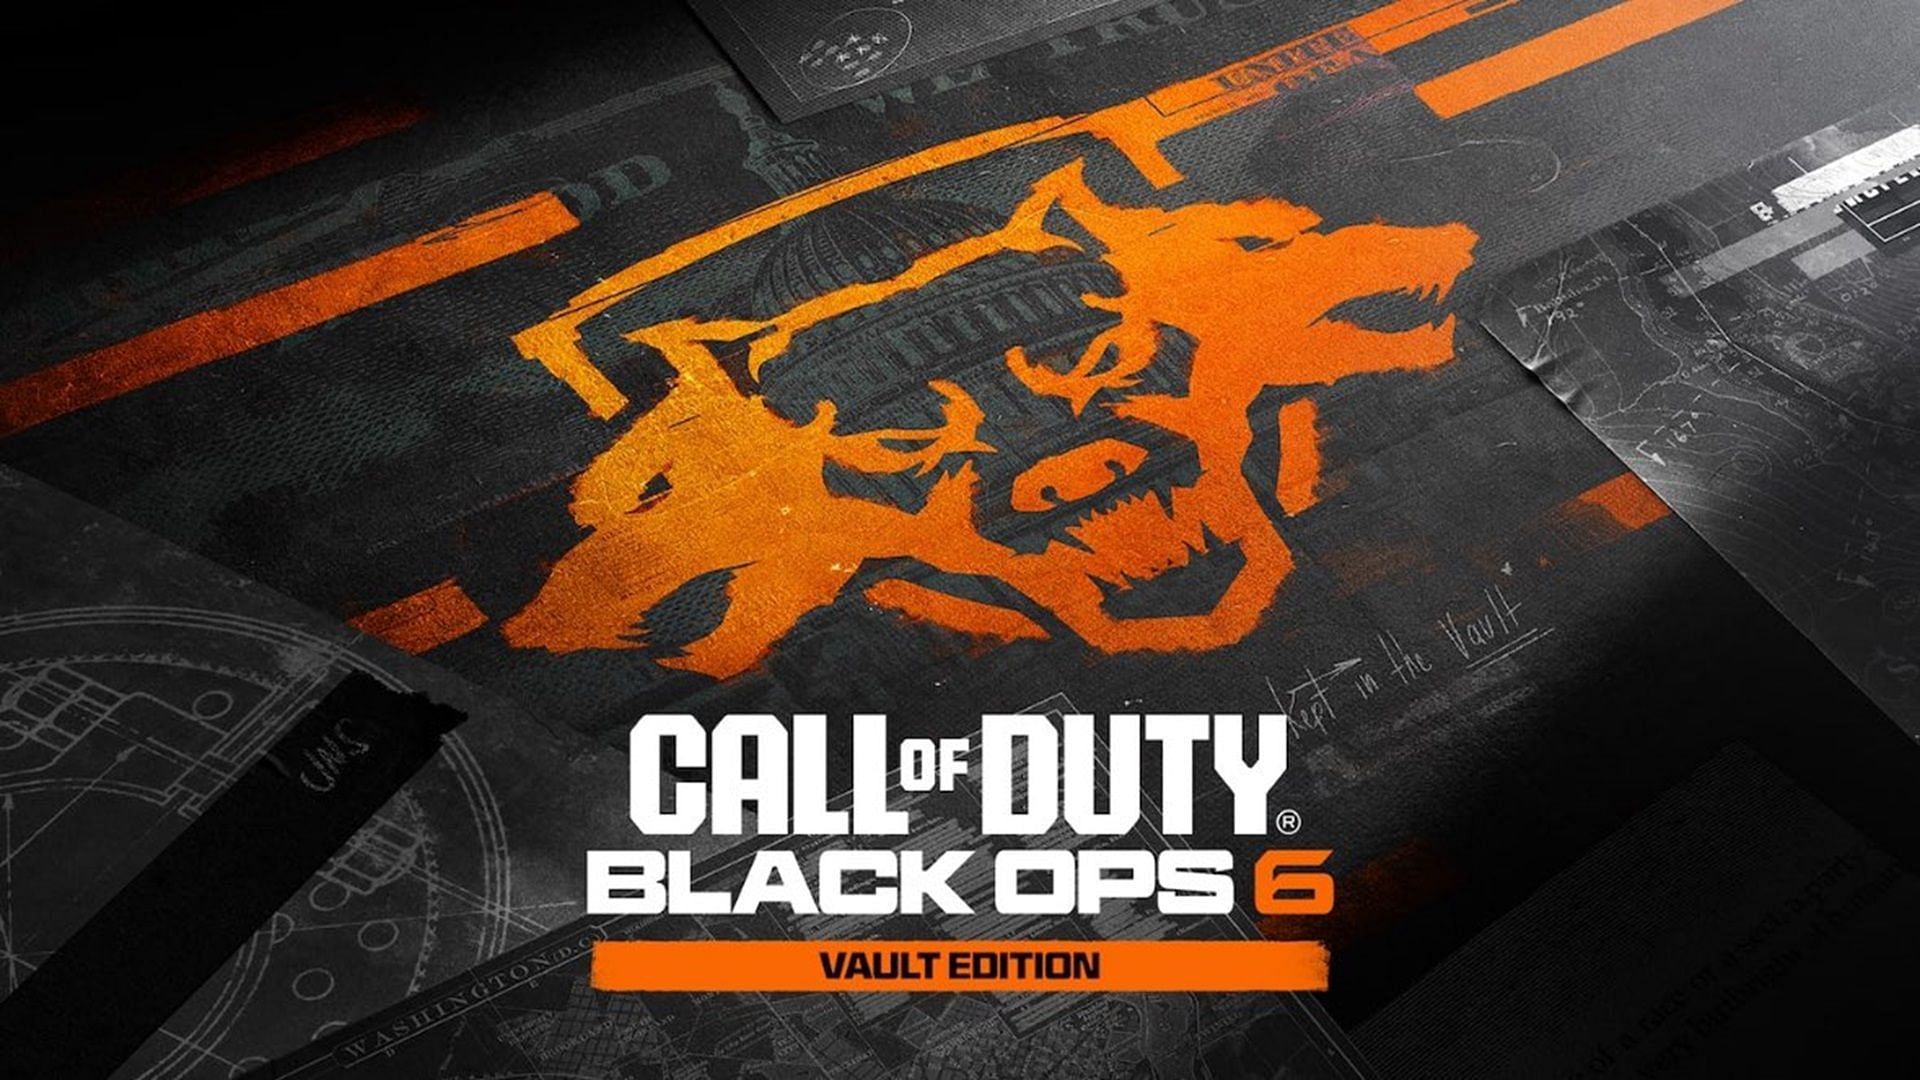 All Black Ops 6 game editions explored (Image via Activision)